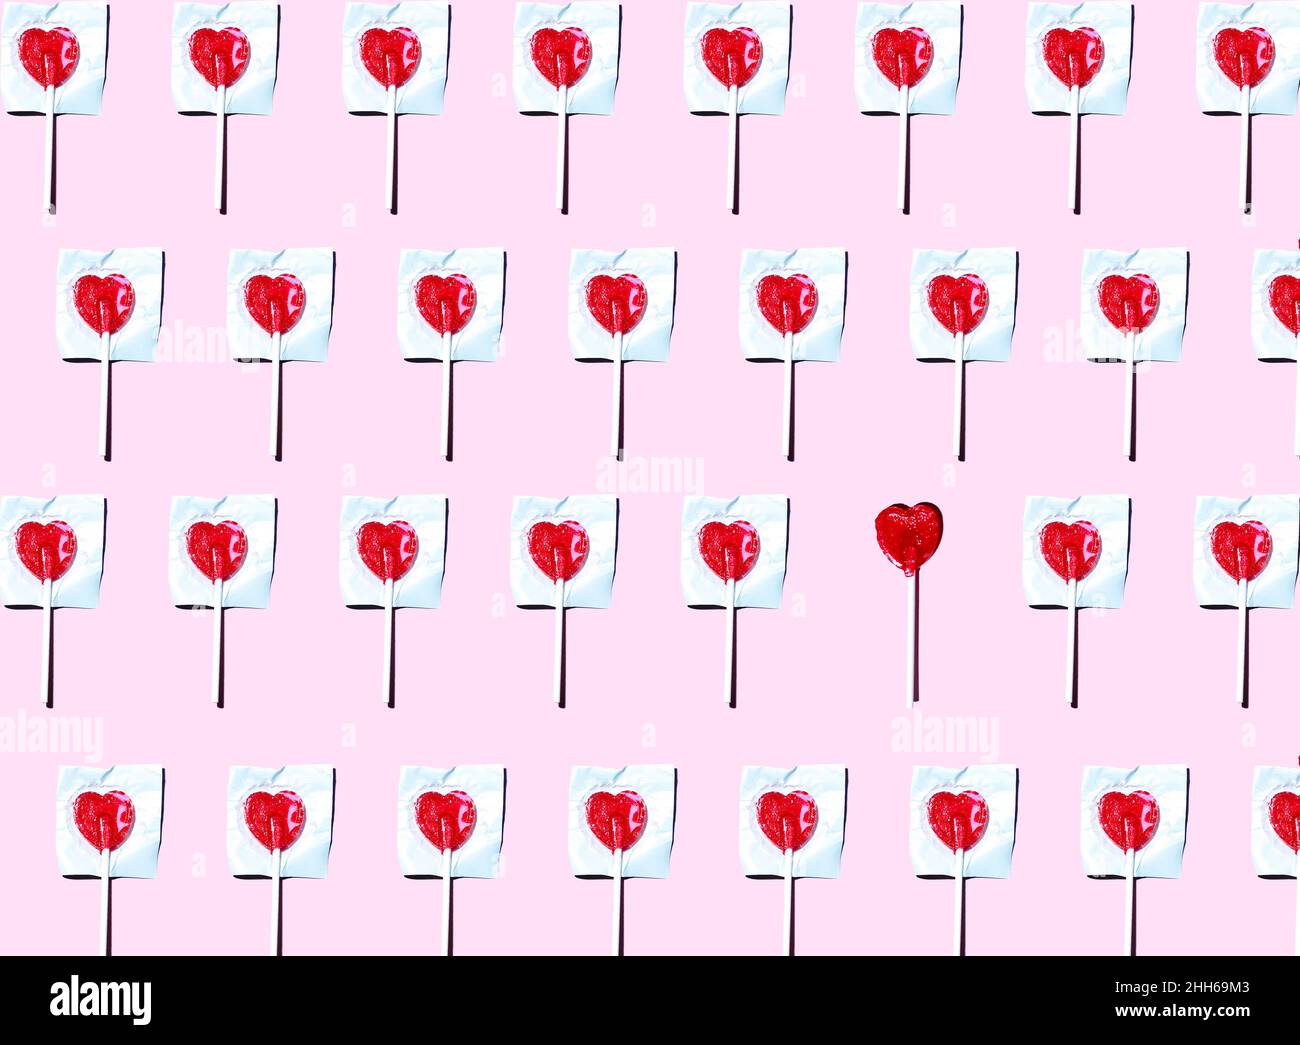 Pattern of heart shaped lollipops flat laid against pink background with single one unwrapped Stock Photo